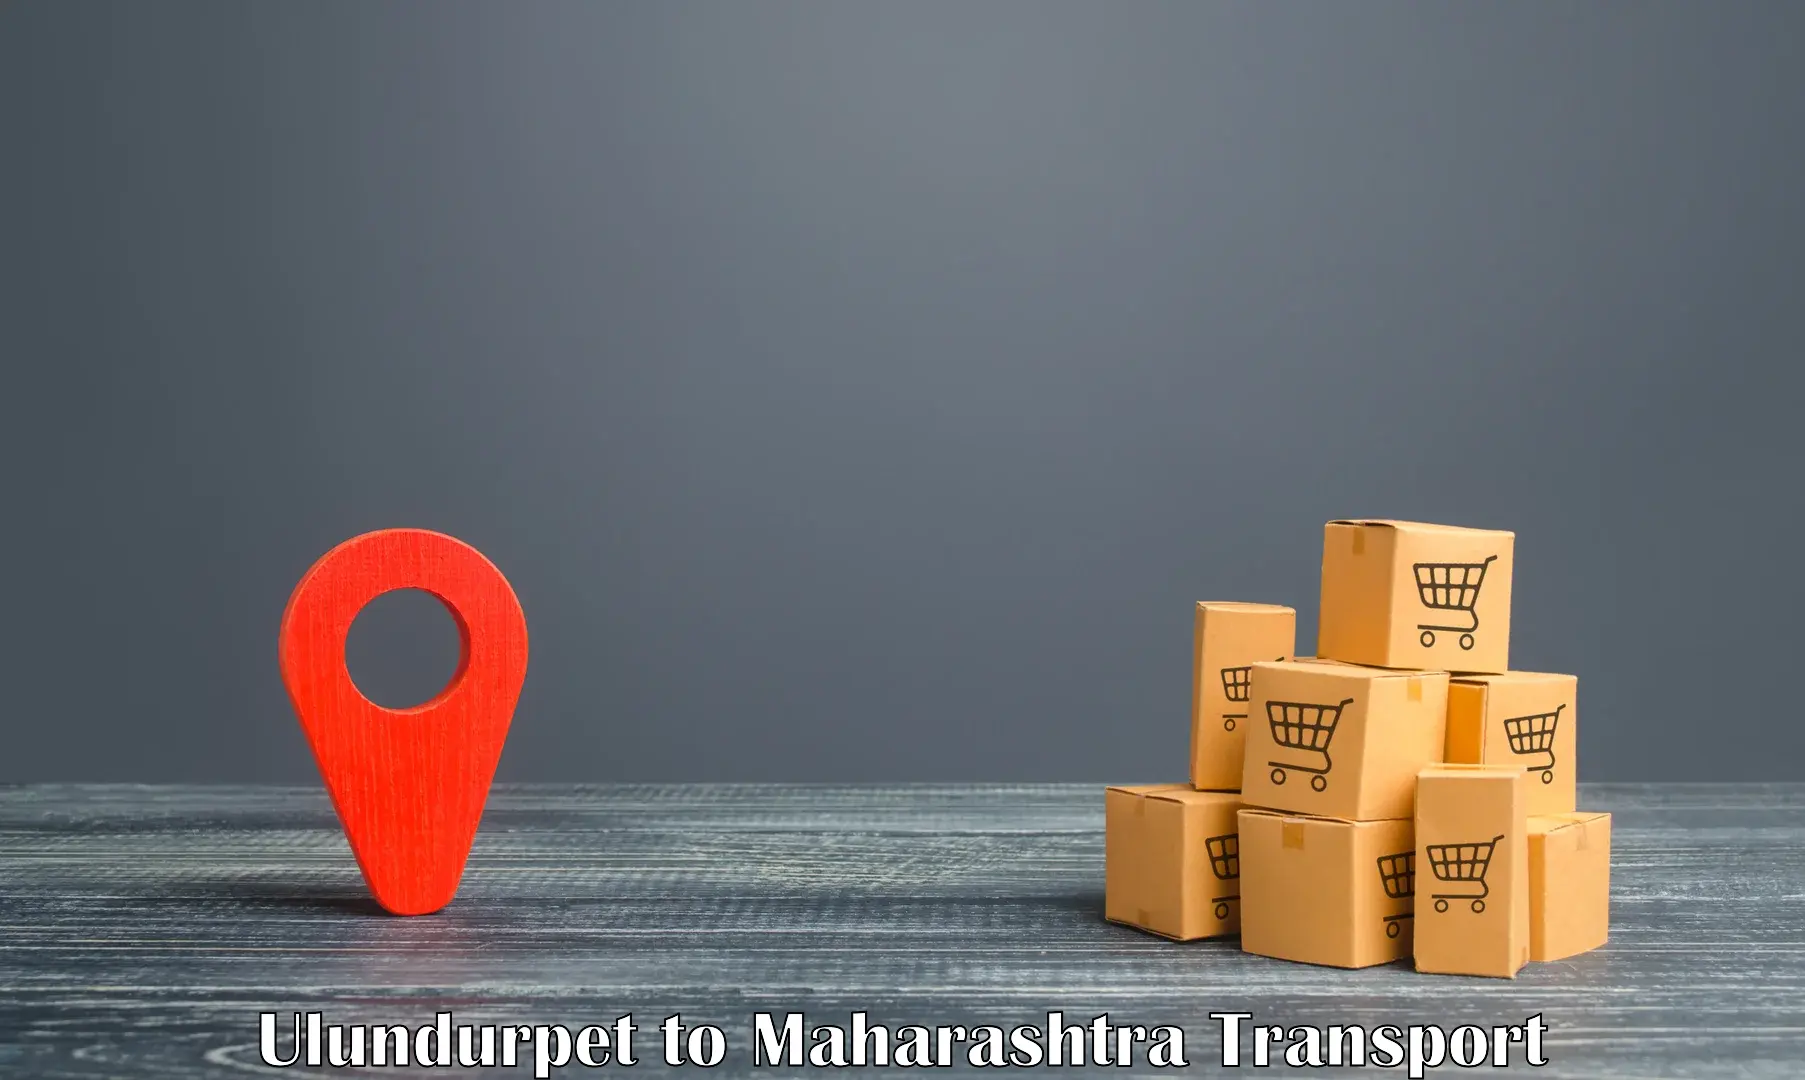 Package delivery services Ulundurpet to Pimpri Chinchwad